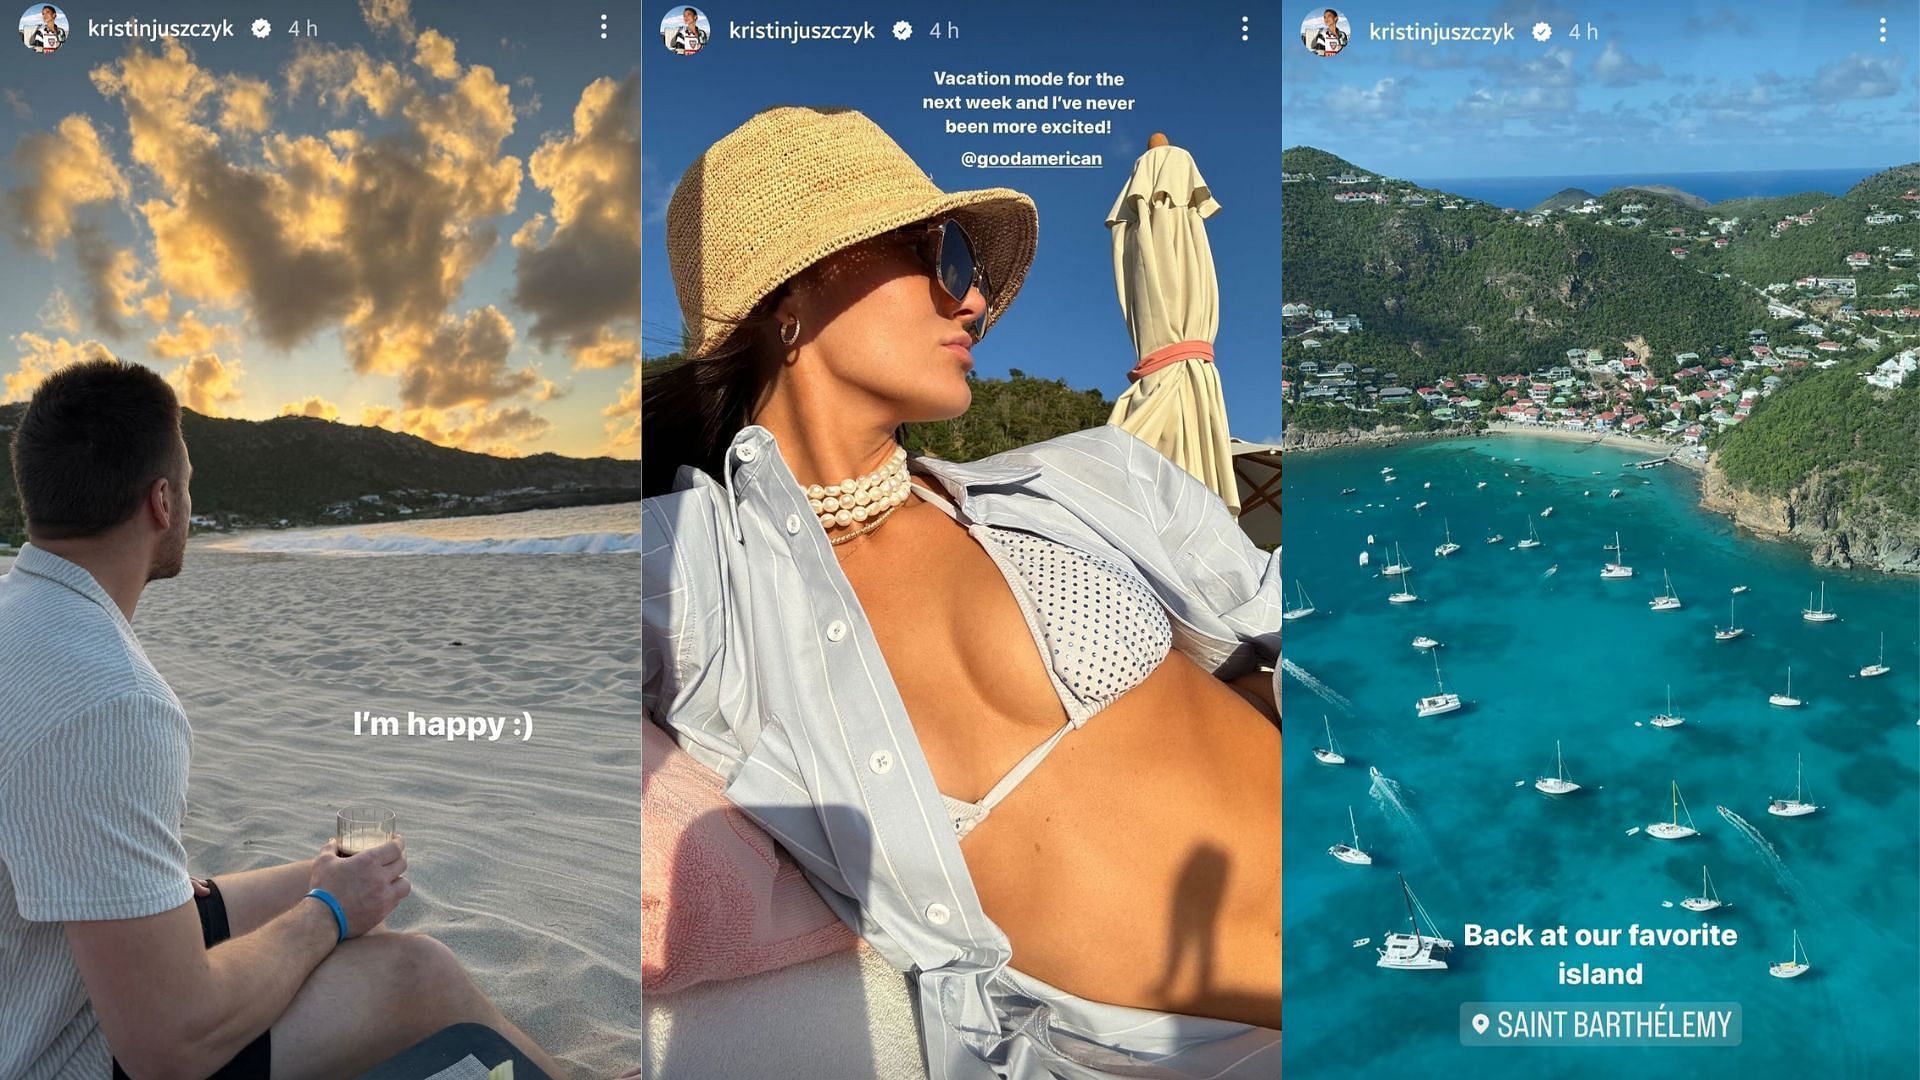 Pictures from Kristin and Kyle Juszczyk&rsquo;s vacation in Saint Barthelemy